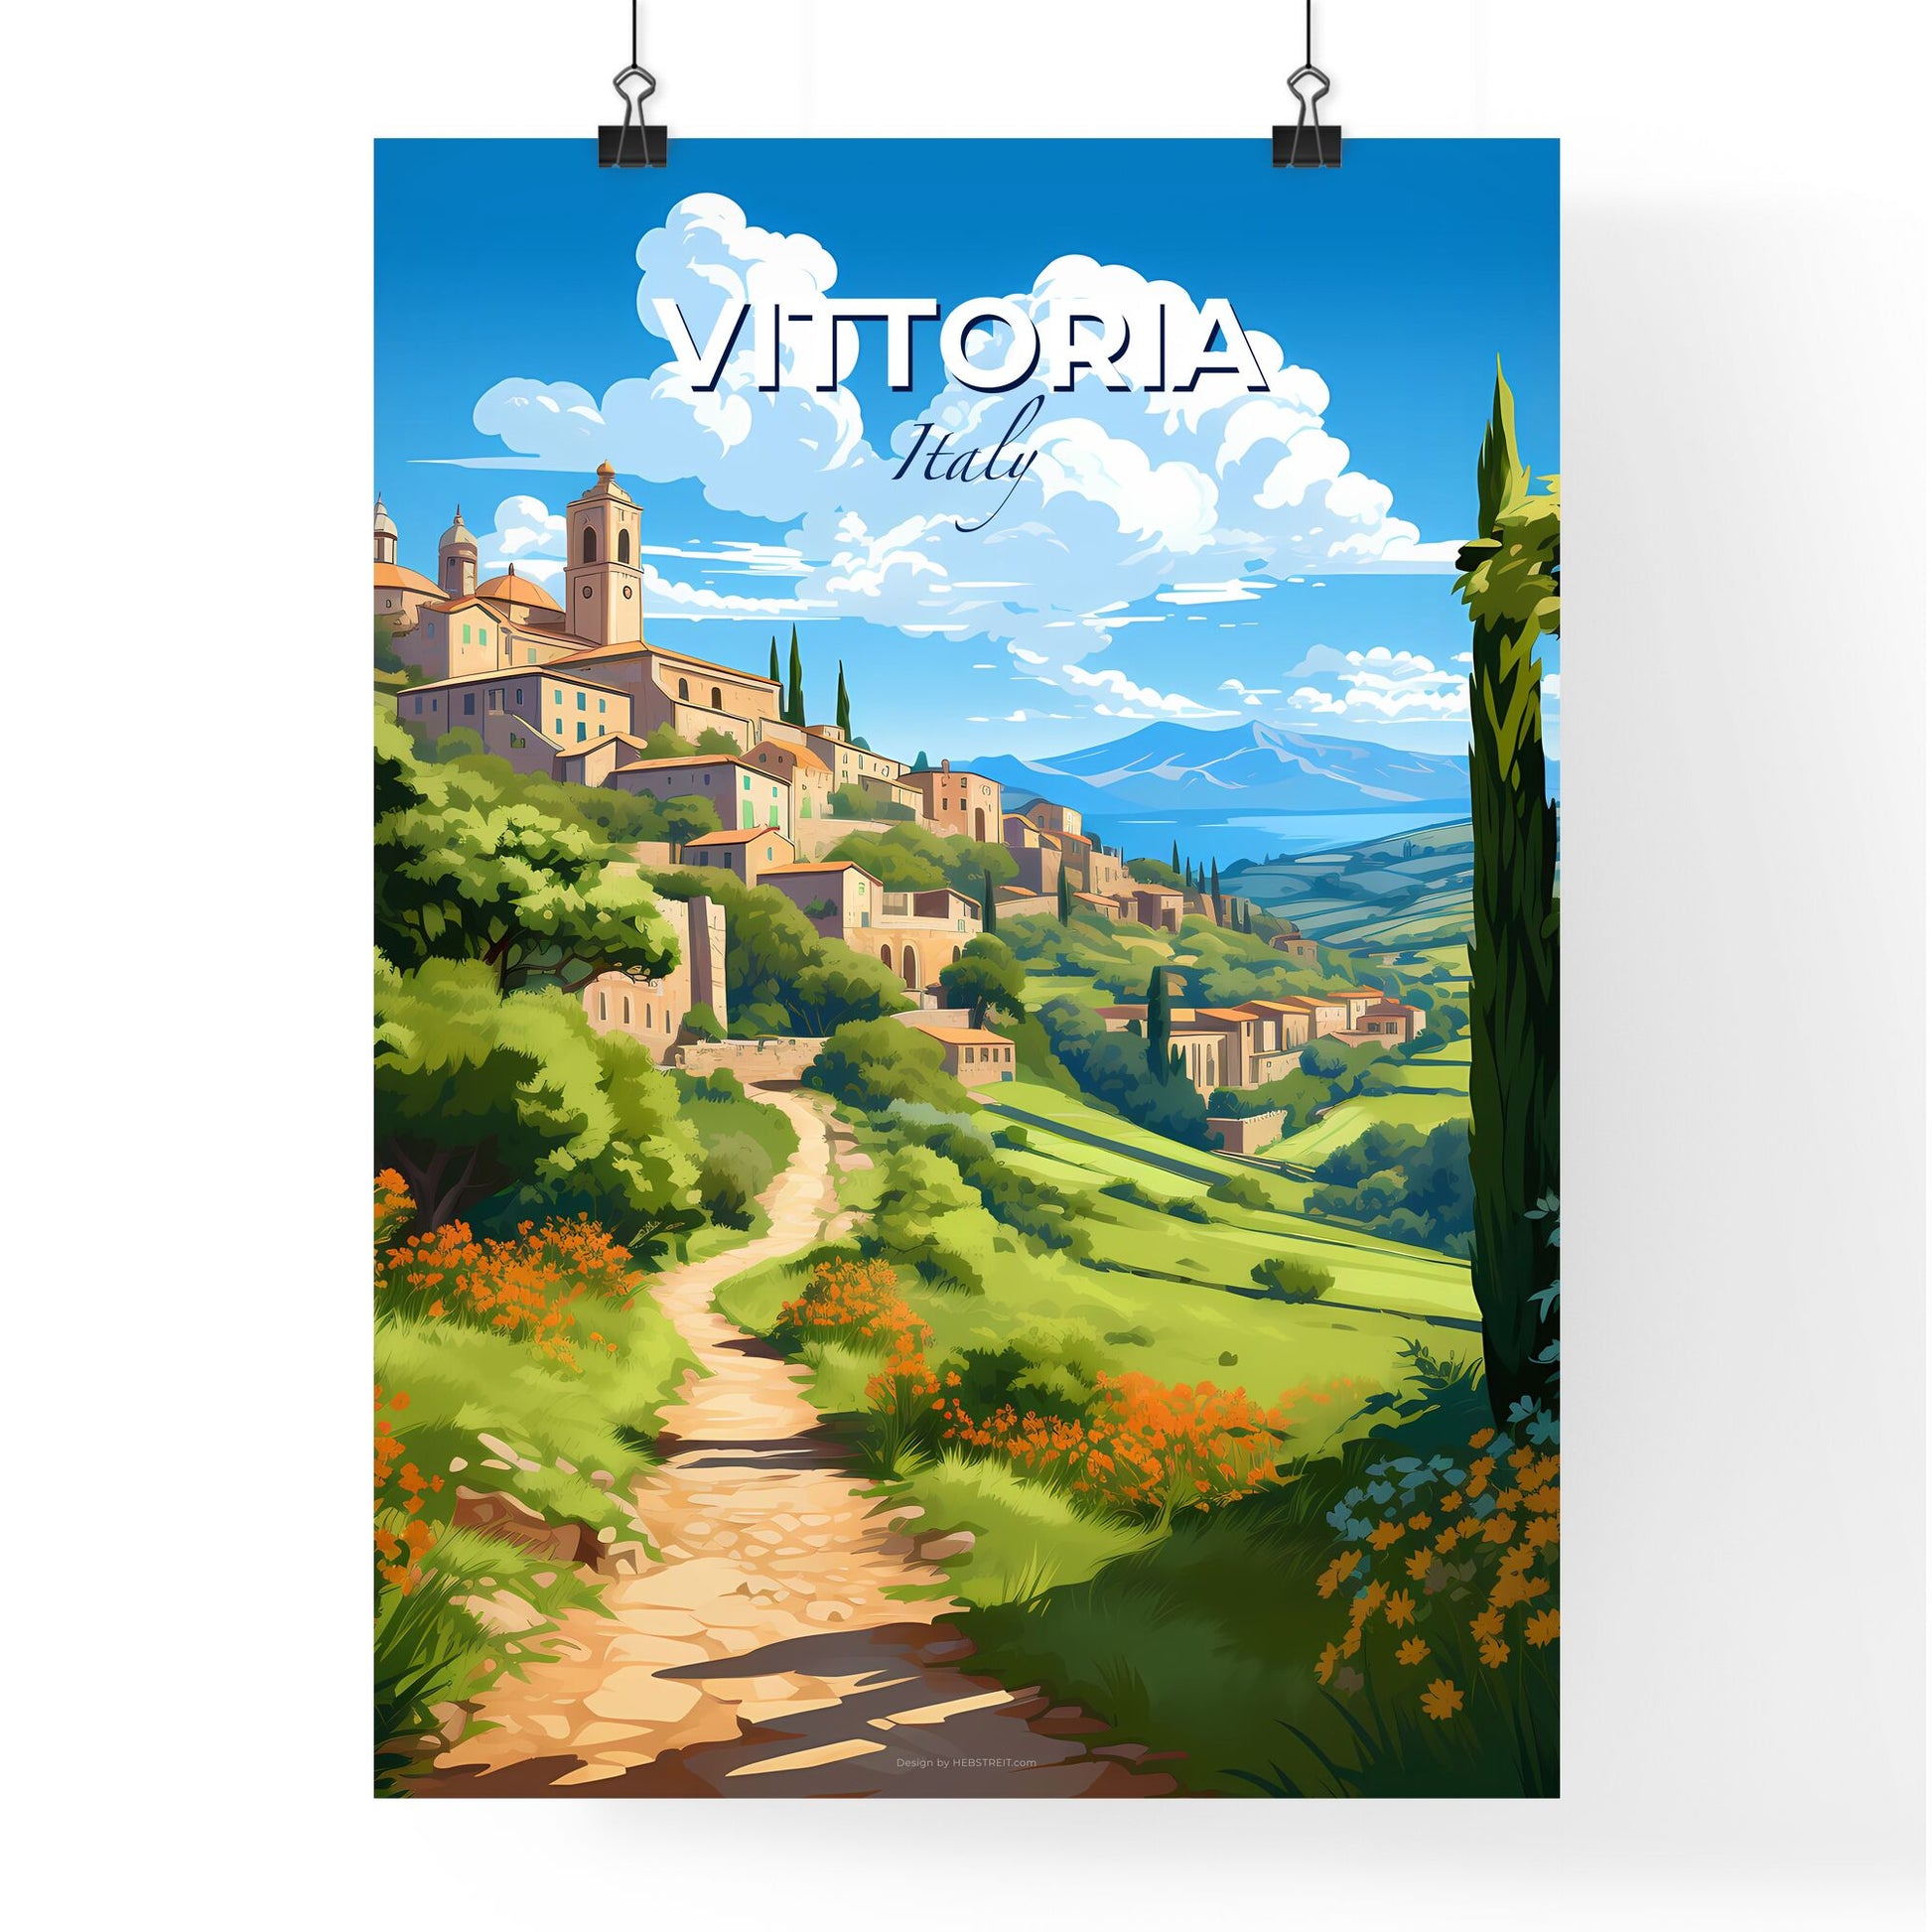 Vittoria, Italy, A Poster of a landscape with a path and a town on the hill Default Title